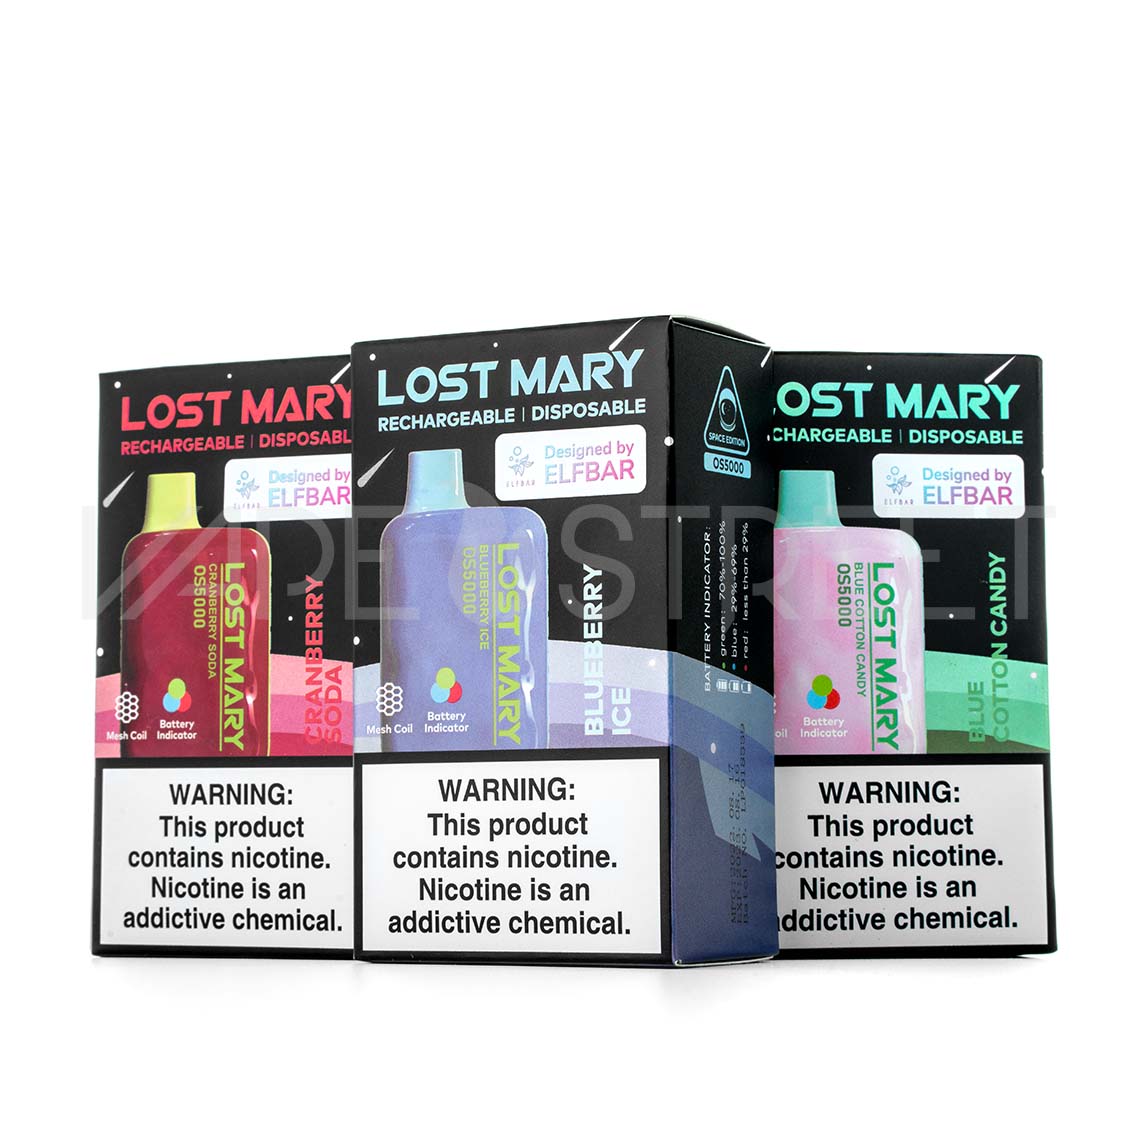 Vape Street: Lost Mary rechargeable disposable